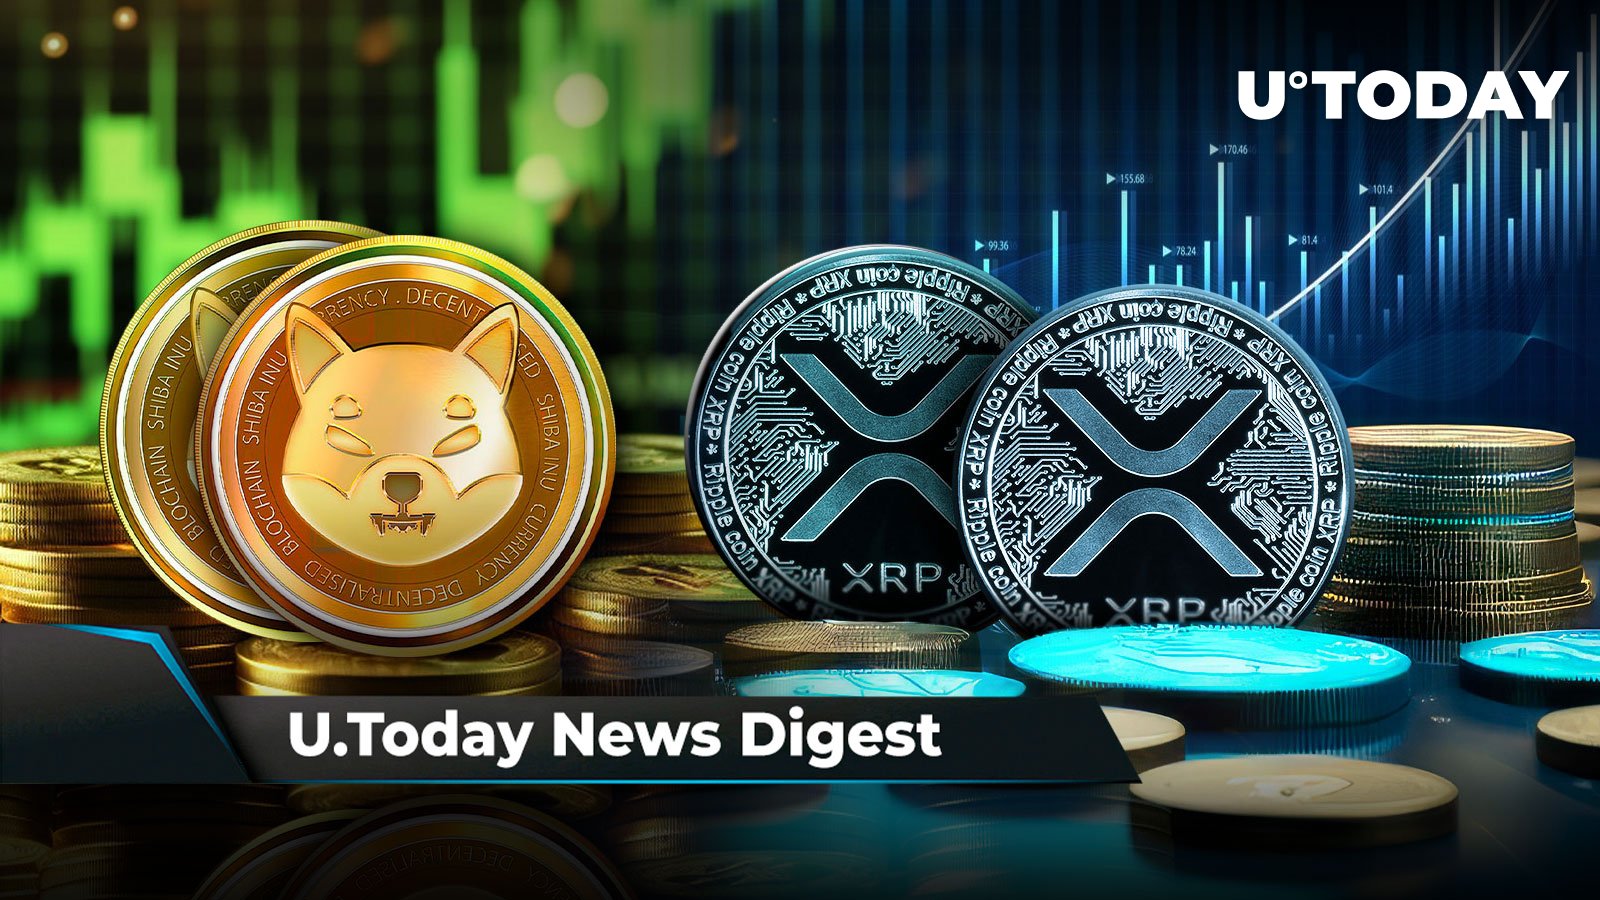 Shiba Inu Team Member Hints at BTC-Driven Supercycle for SHIB, XRP on Verge of Crazy Price Jump, BTC Leaving Exchanges En Masse: Crypto News Digest by U.Today